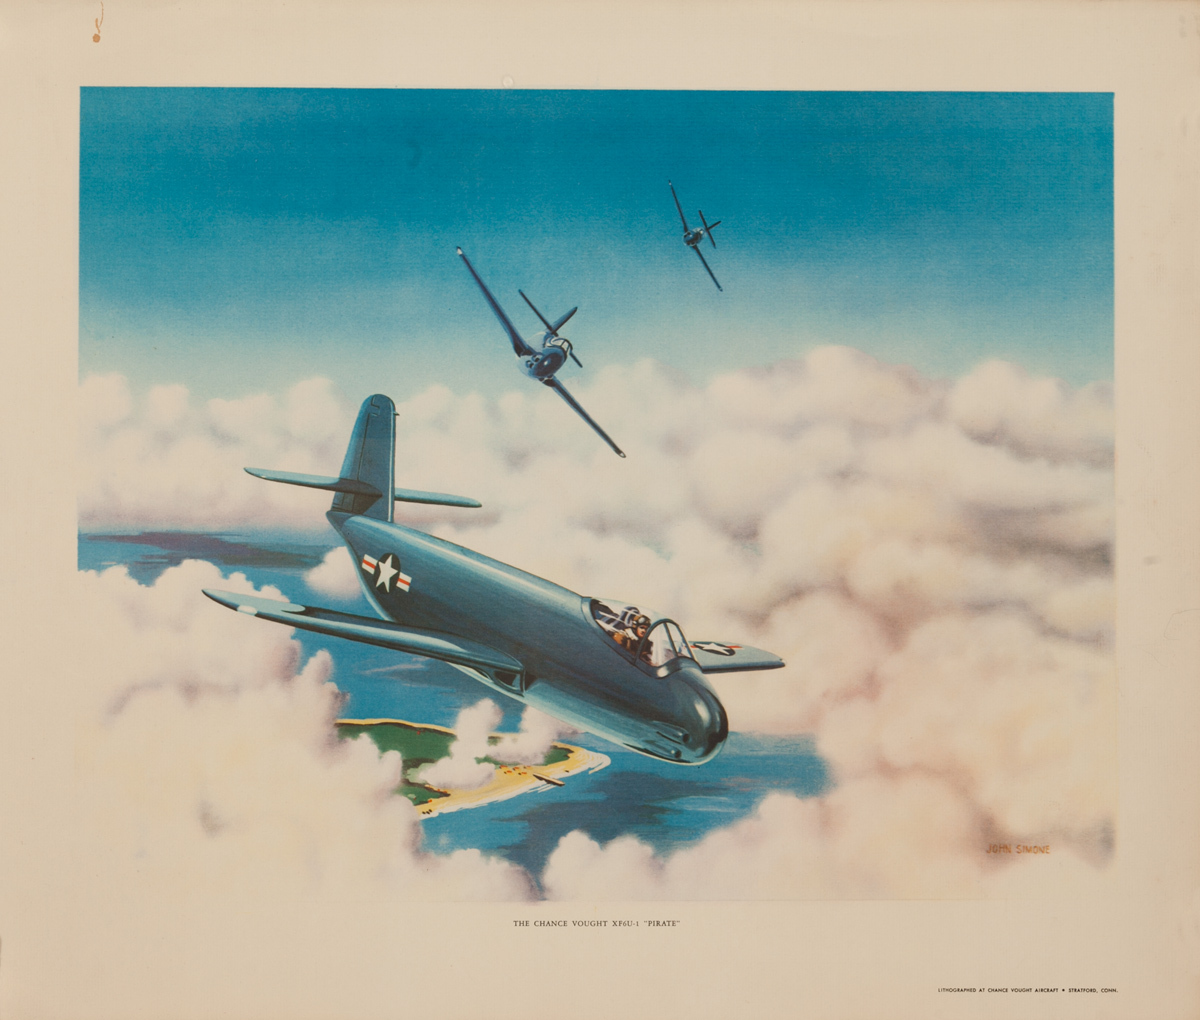 The Chance Vought XF6U-1 "Pirate", Original American WWII Poster